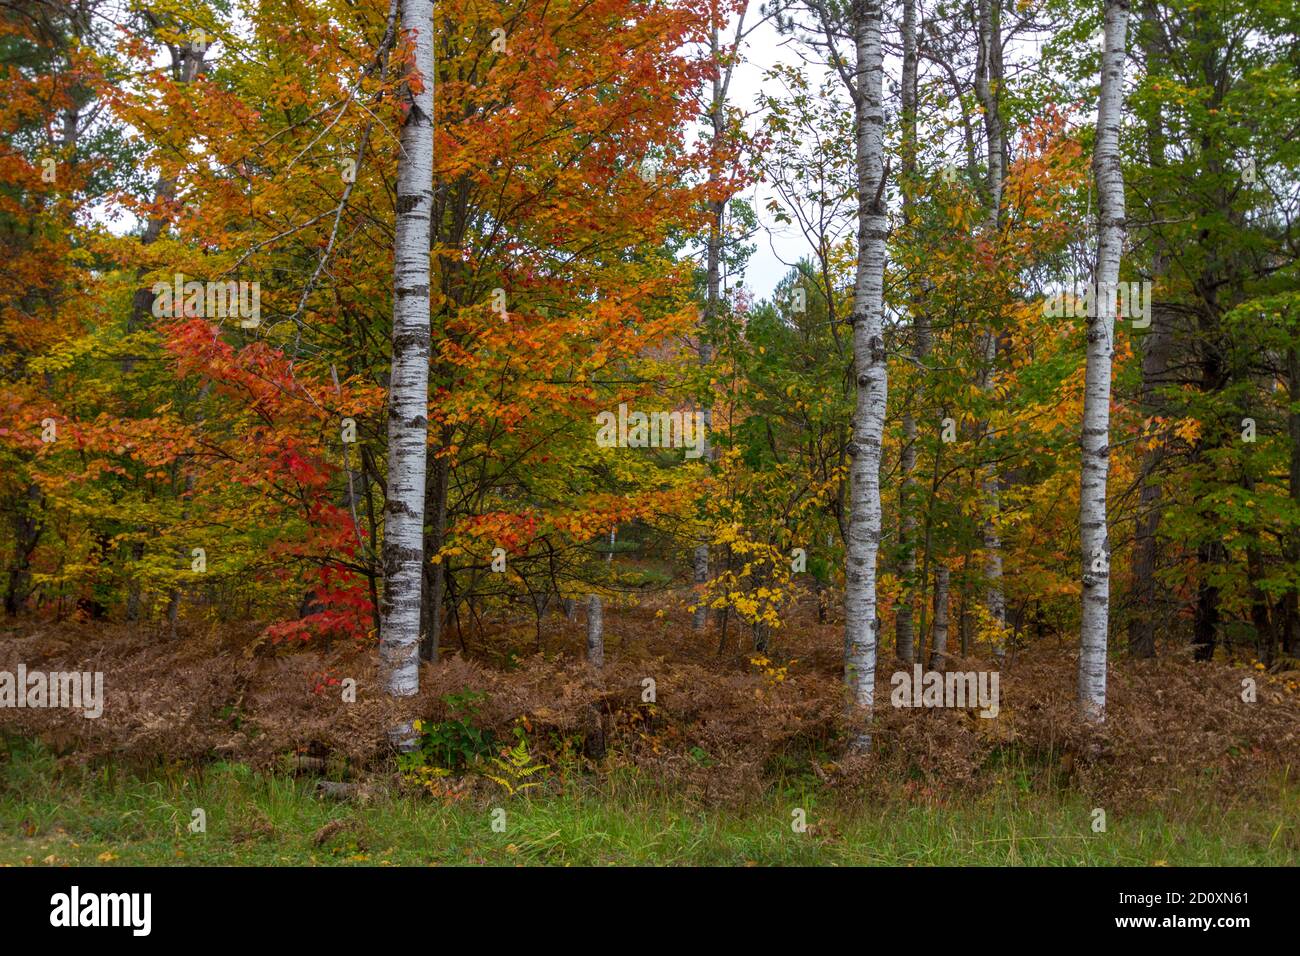 Autumn Nature Background. Vibrant autumn colors on sugar maple saplings and birch trees in a northern hardwoods forest. Stock Photo